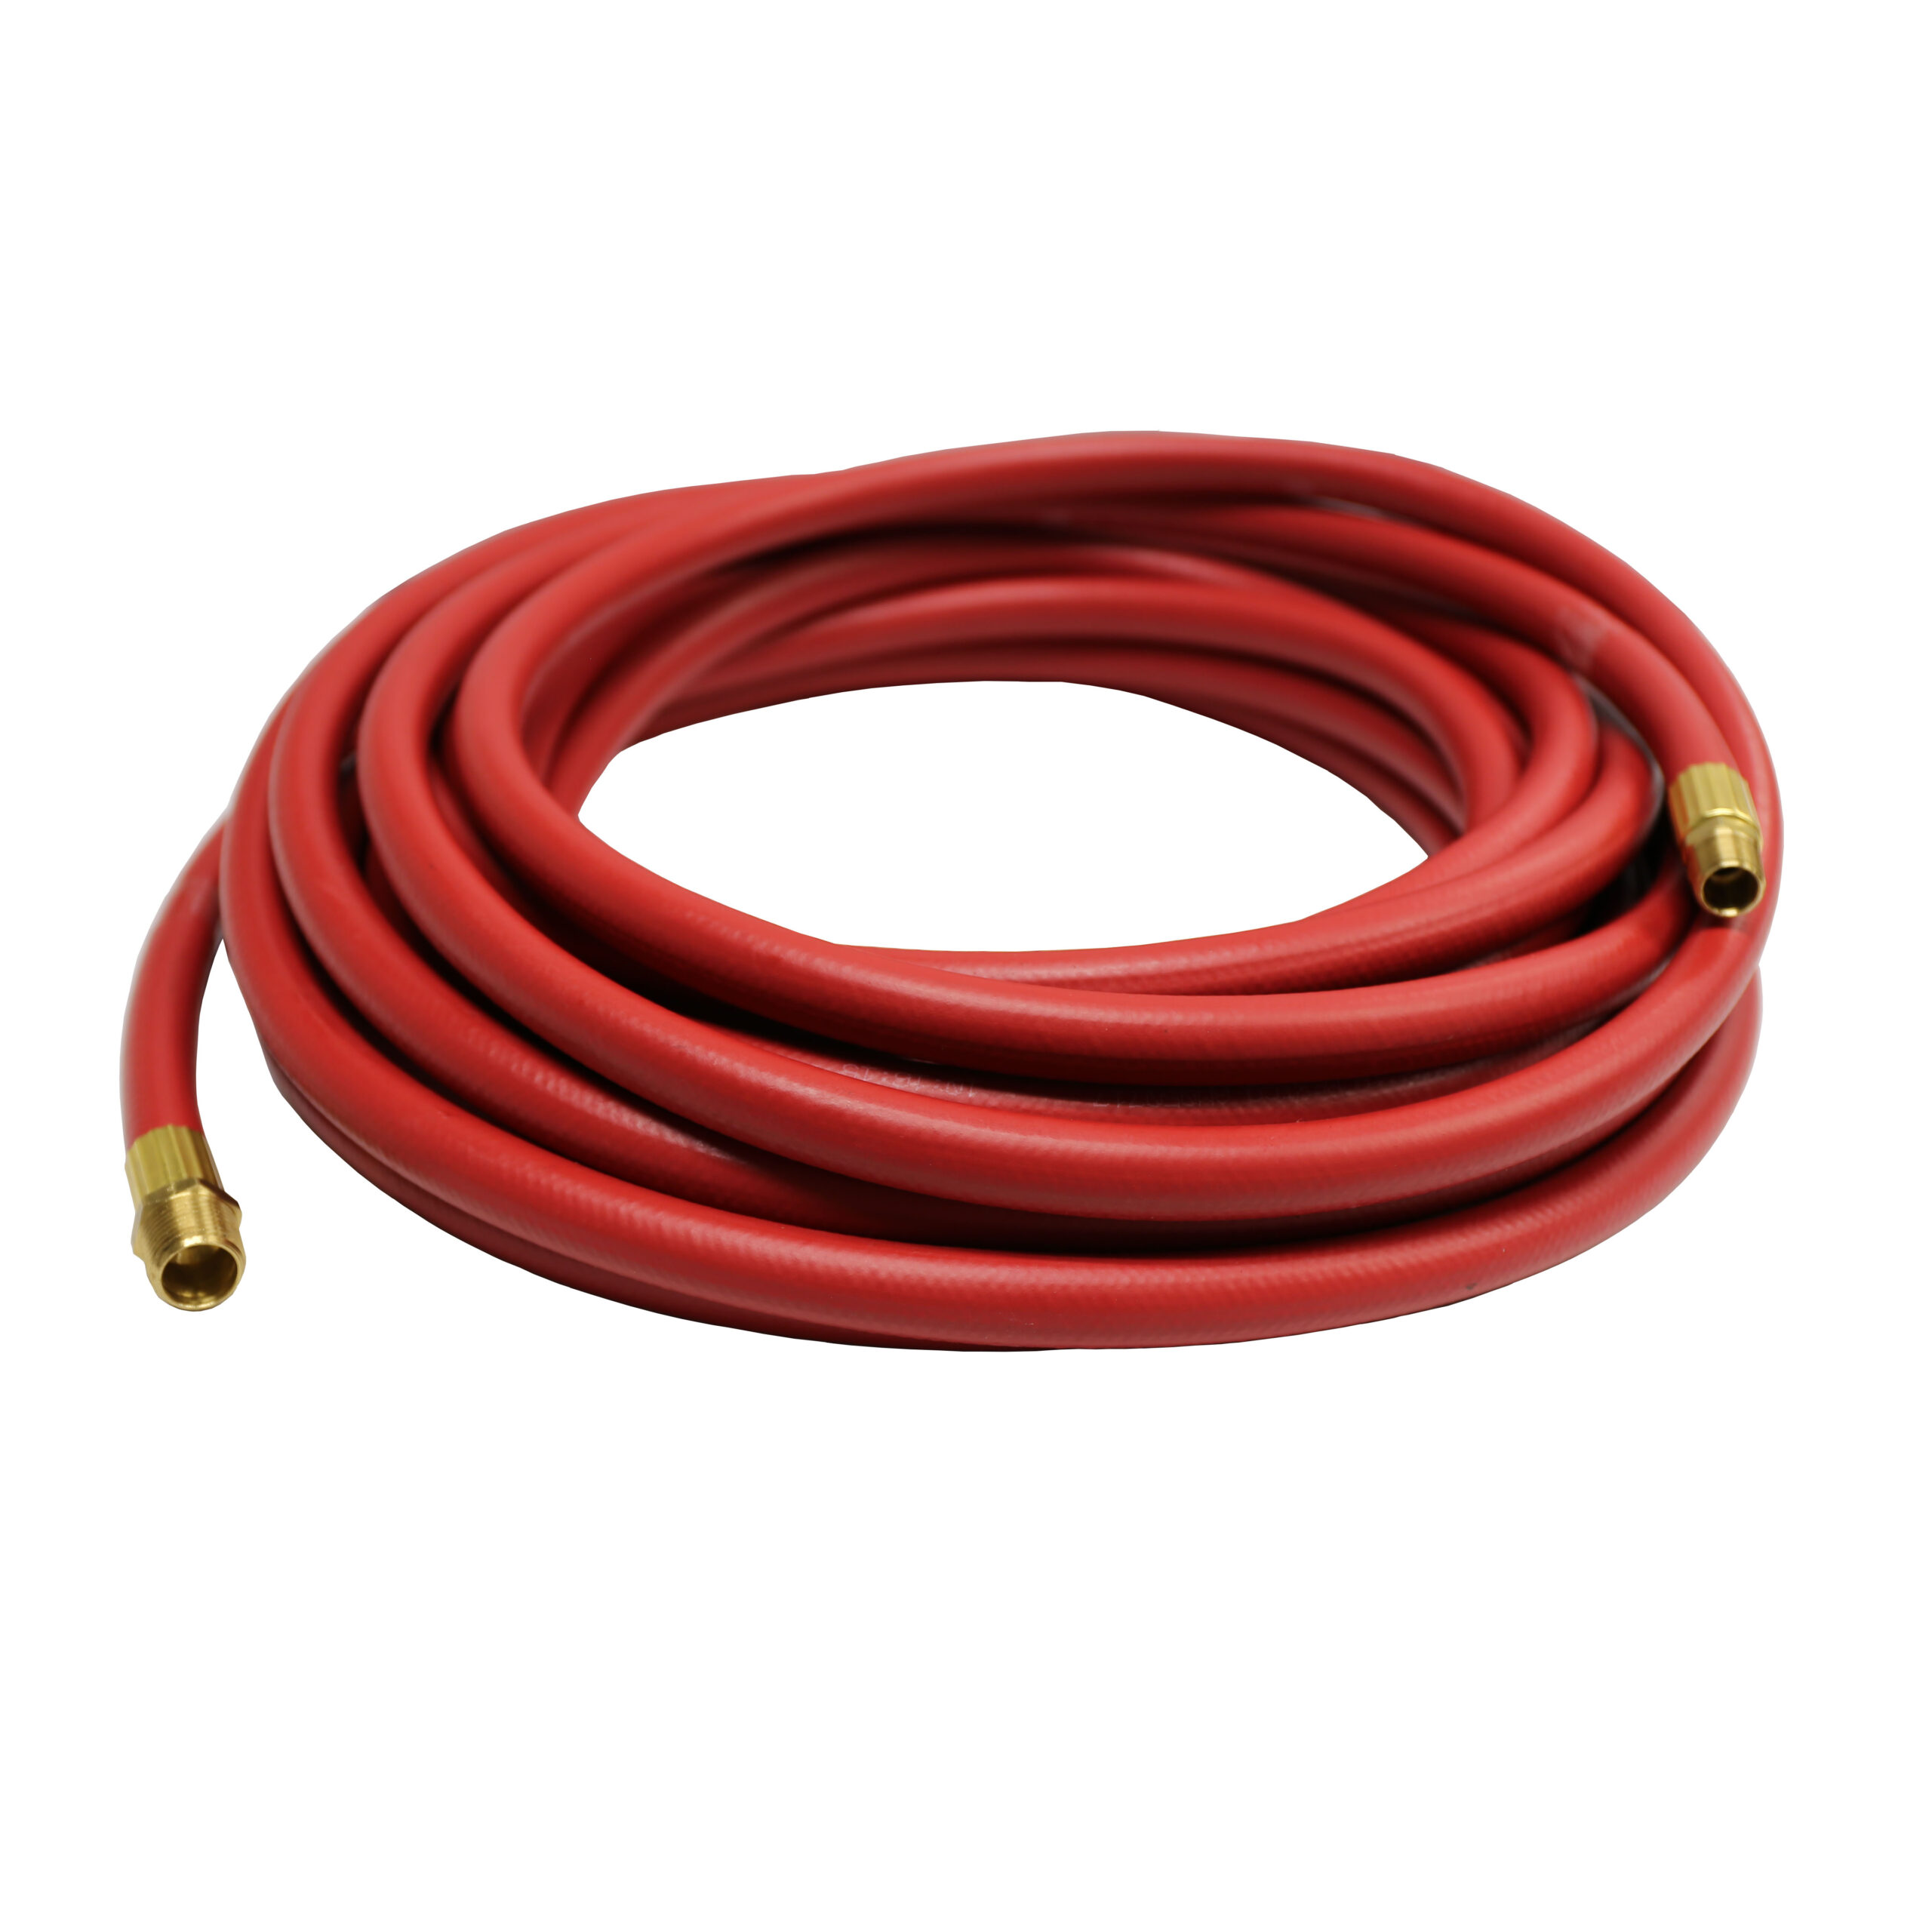 Reelcraft 601148-100 - 1/2 in. x 100 ft. Low Pressure Rubber Air Hose